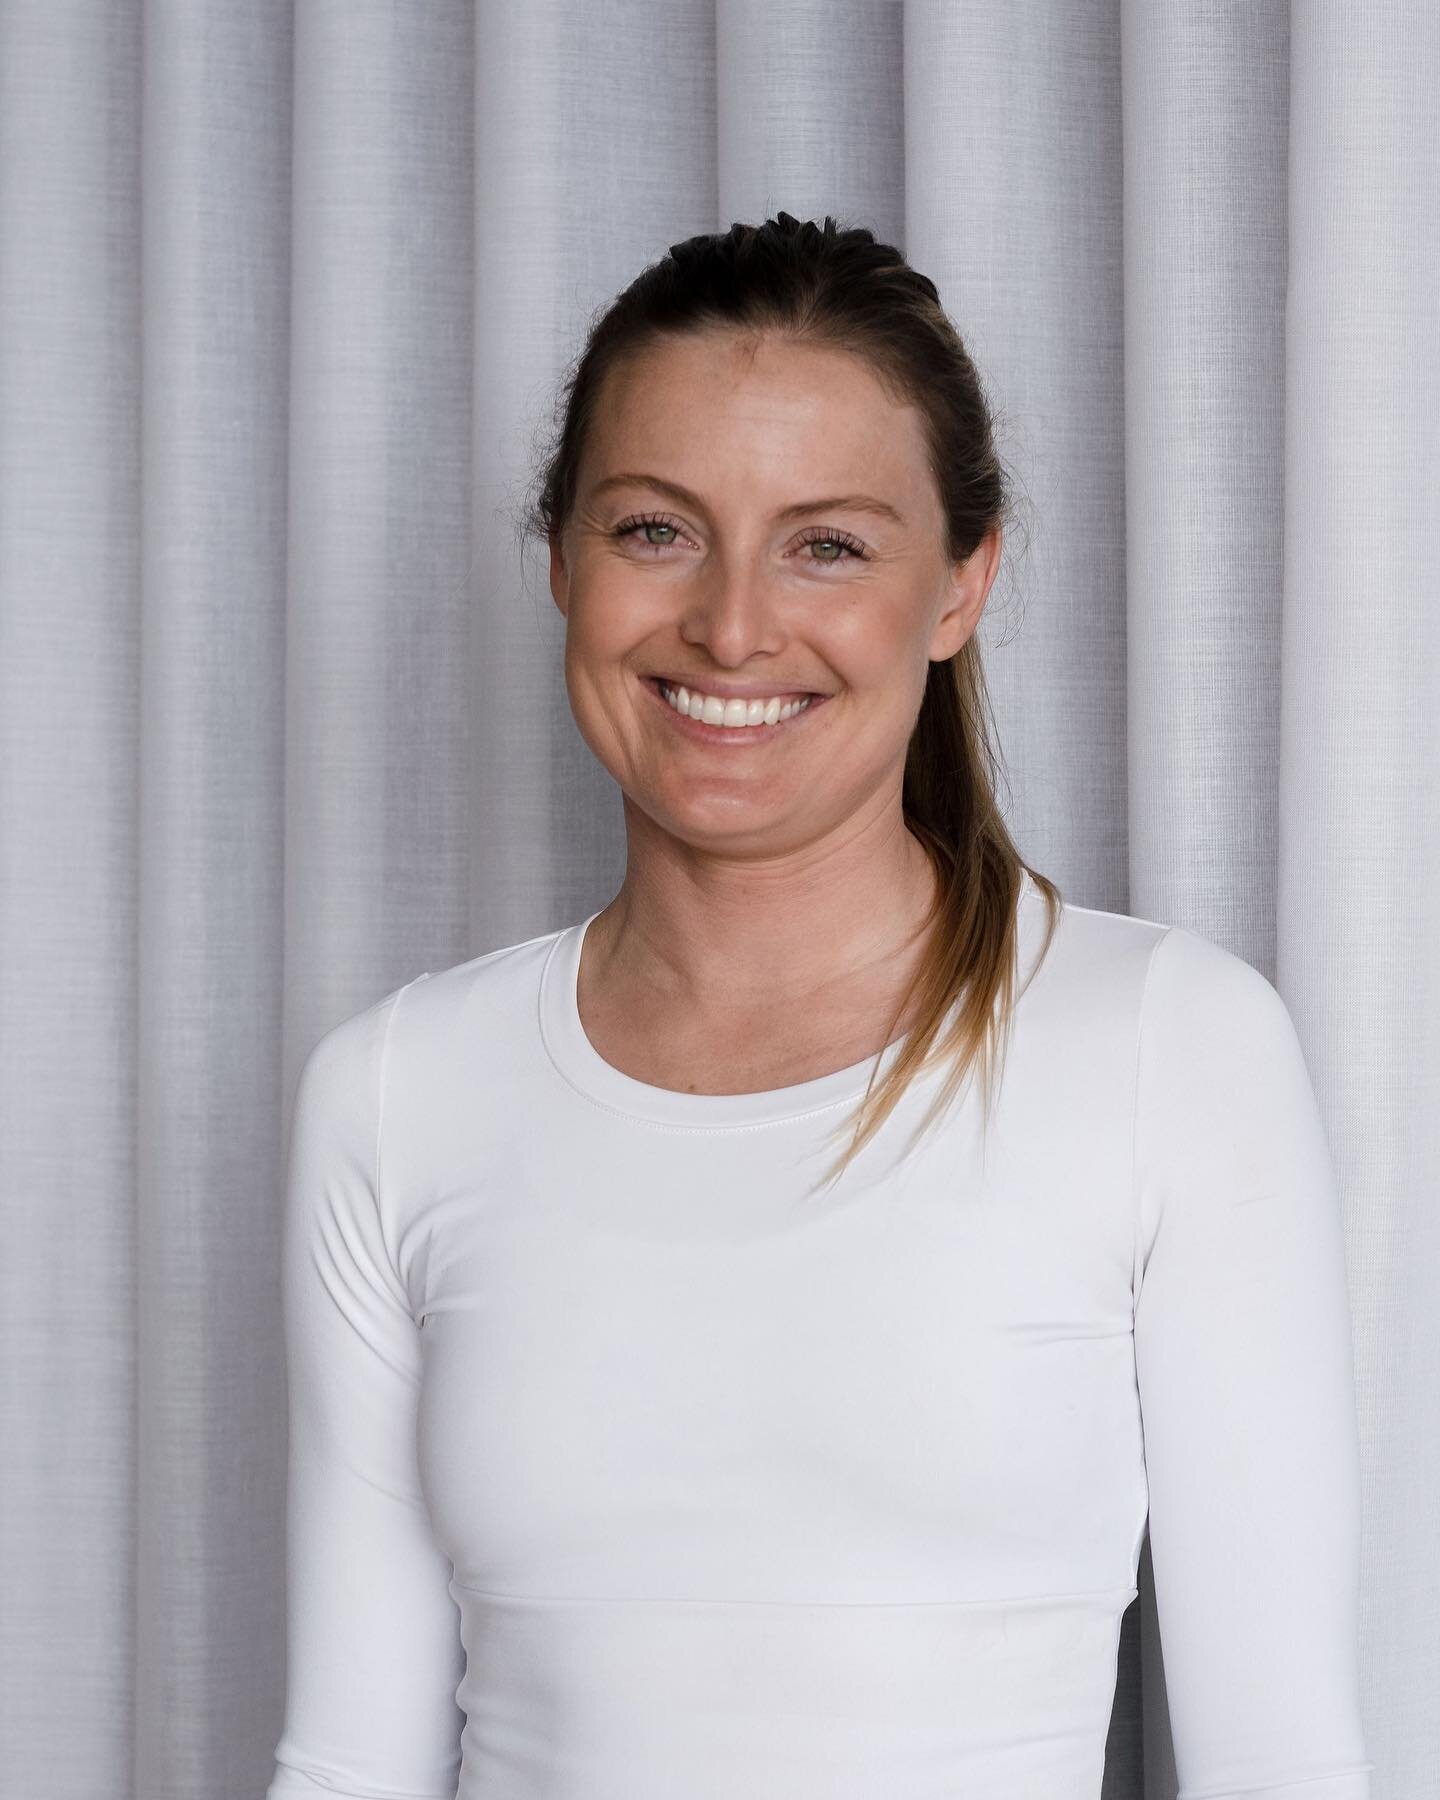 NJOY INSTRUCTOR PROFILE: ⚡️ 

Meet Skye! You may have had the pleasure of attending one of her Reformer Pilates classes already. Skye loves all styles of Pilates! She is keen to share her love of Pilates with all of you and guide you to find your pot